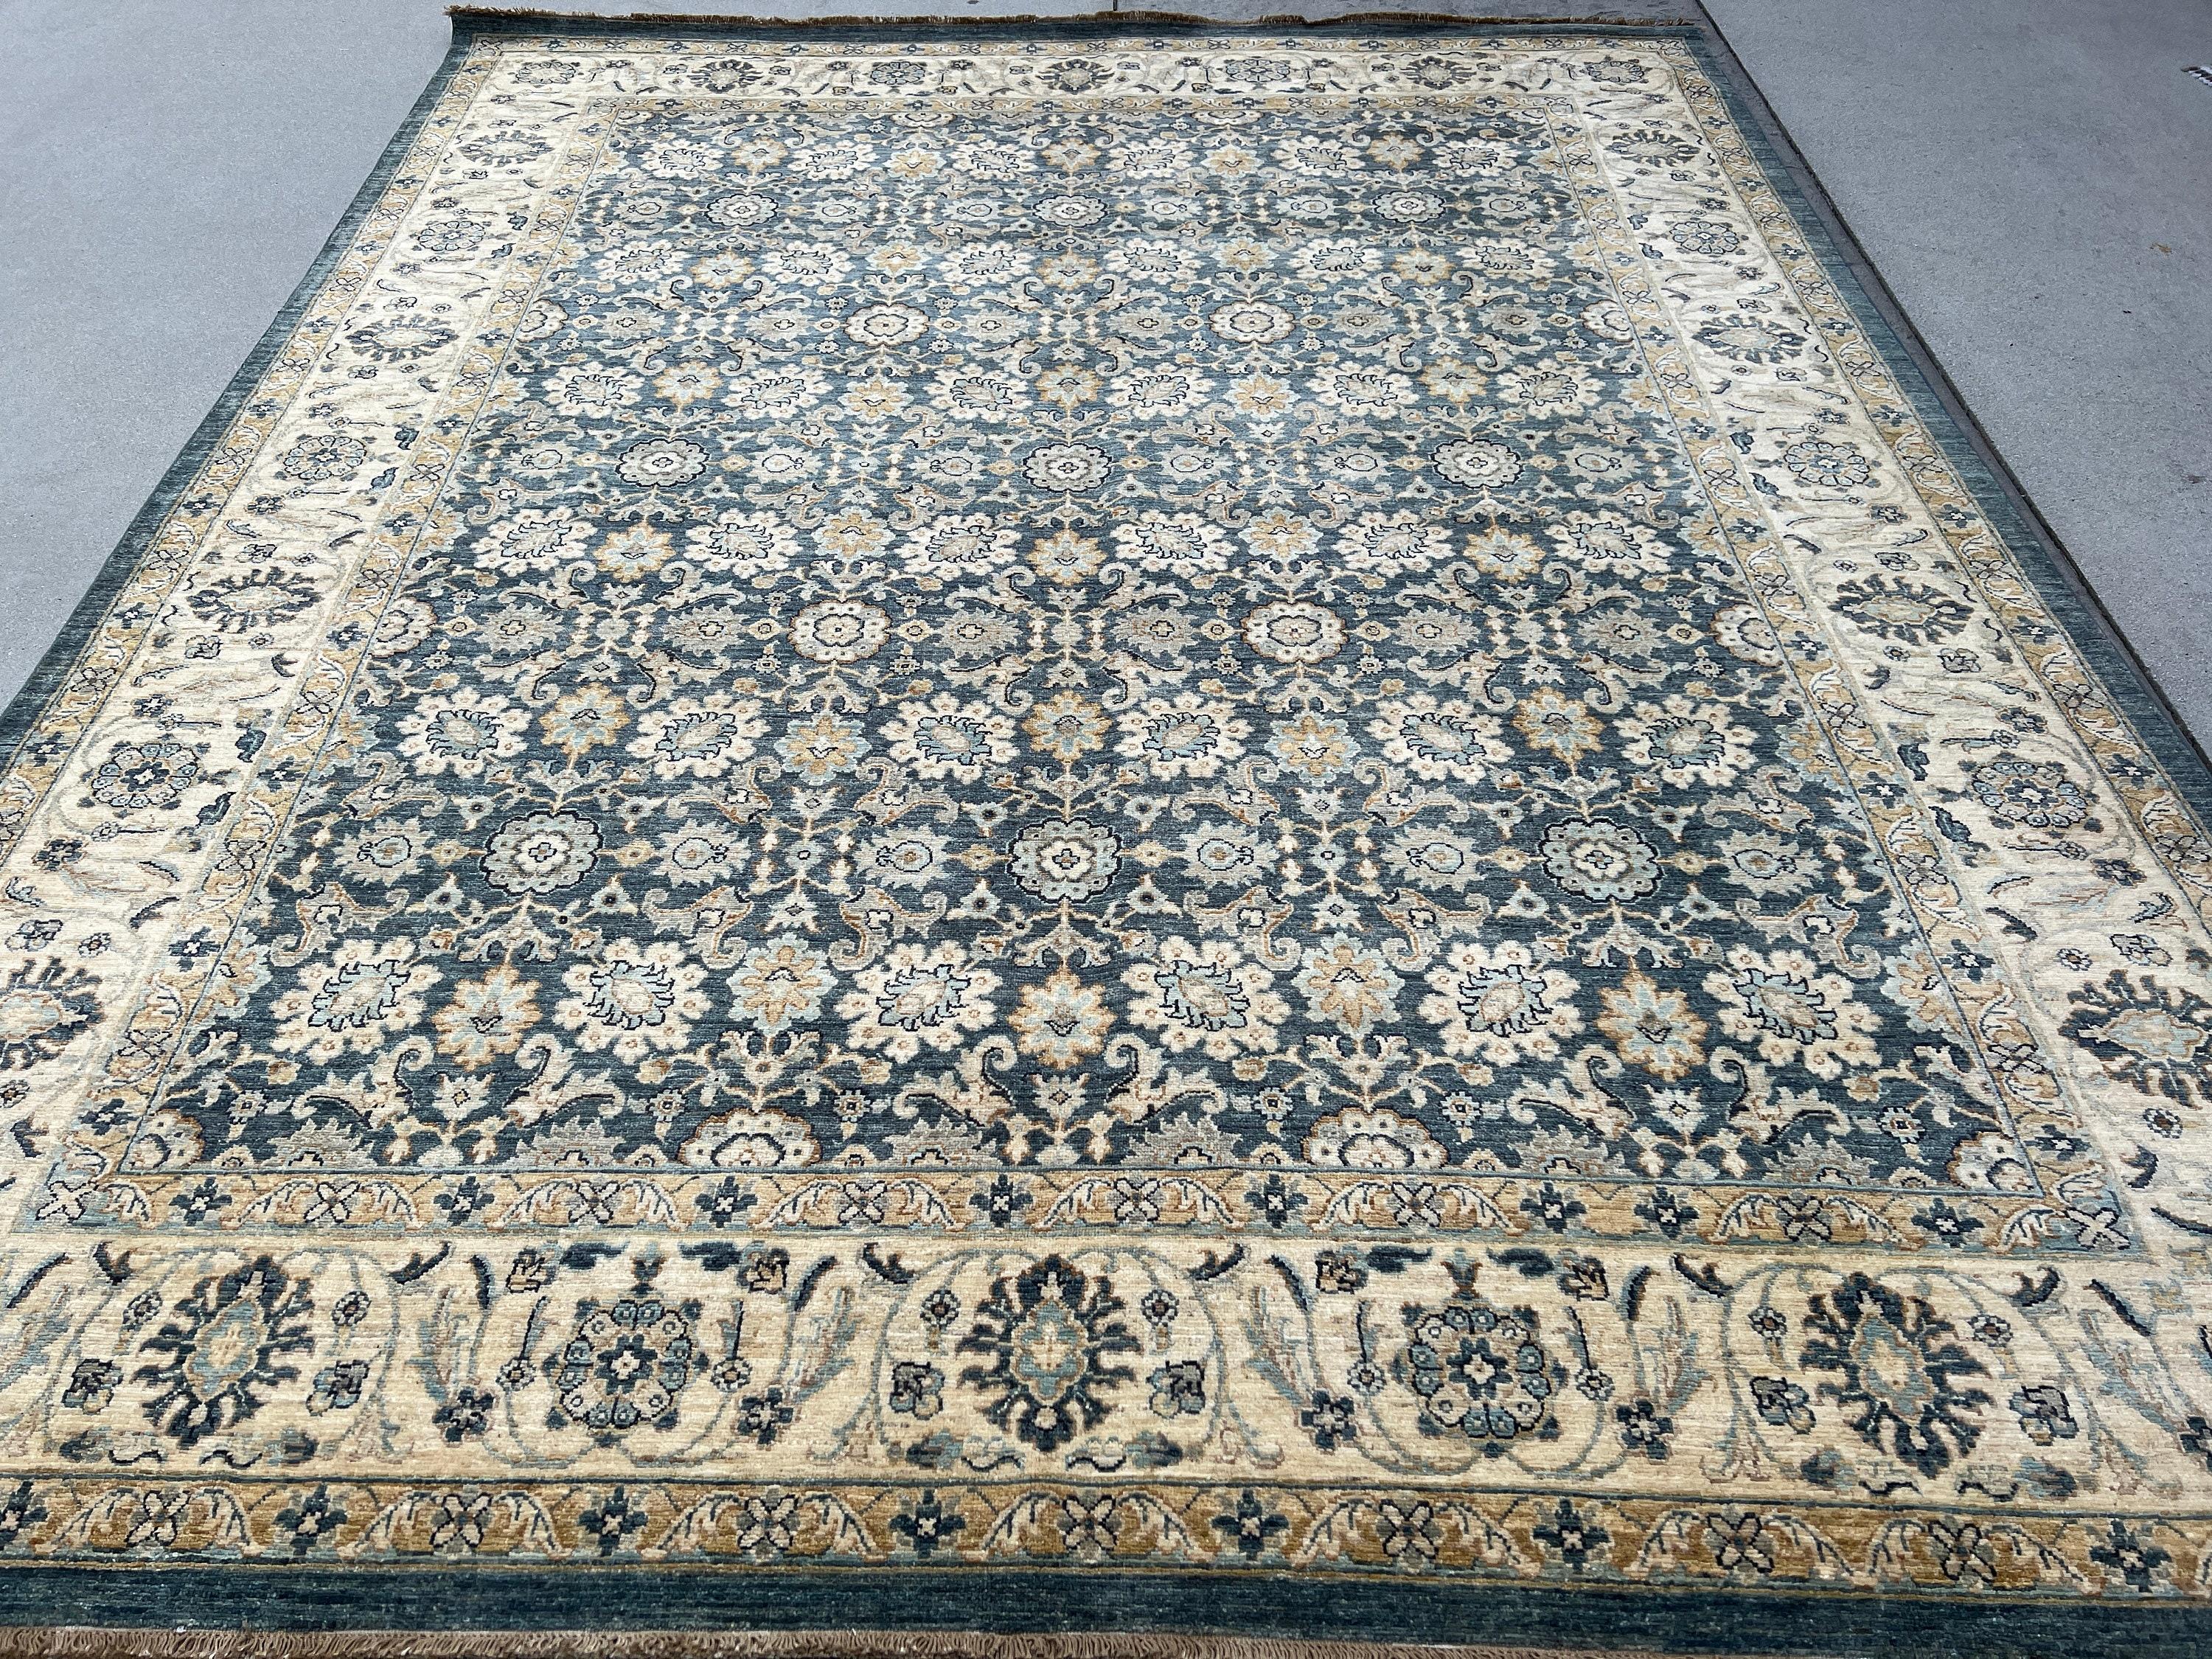 8x10 Hand-Knotted Afghan Rug Premium Hand-Spun Afghan Wool Fair Trade In New Condition For Sale In San Marcos, CA